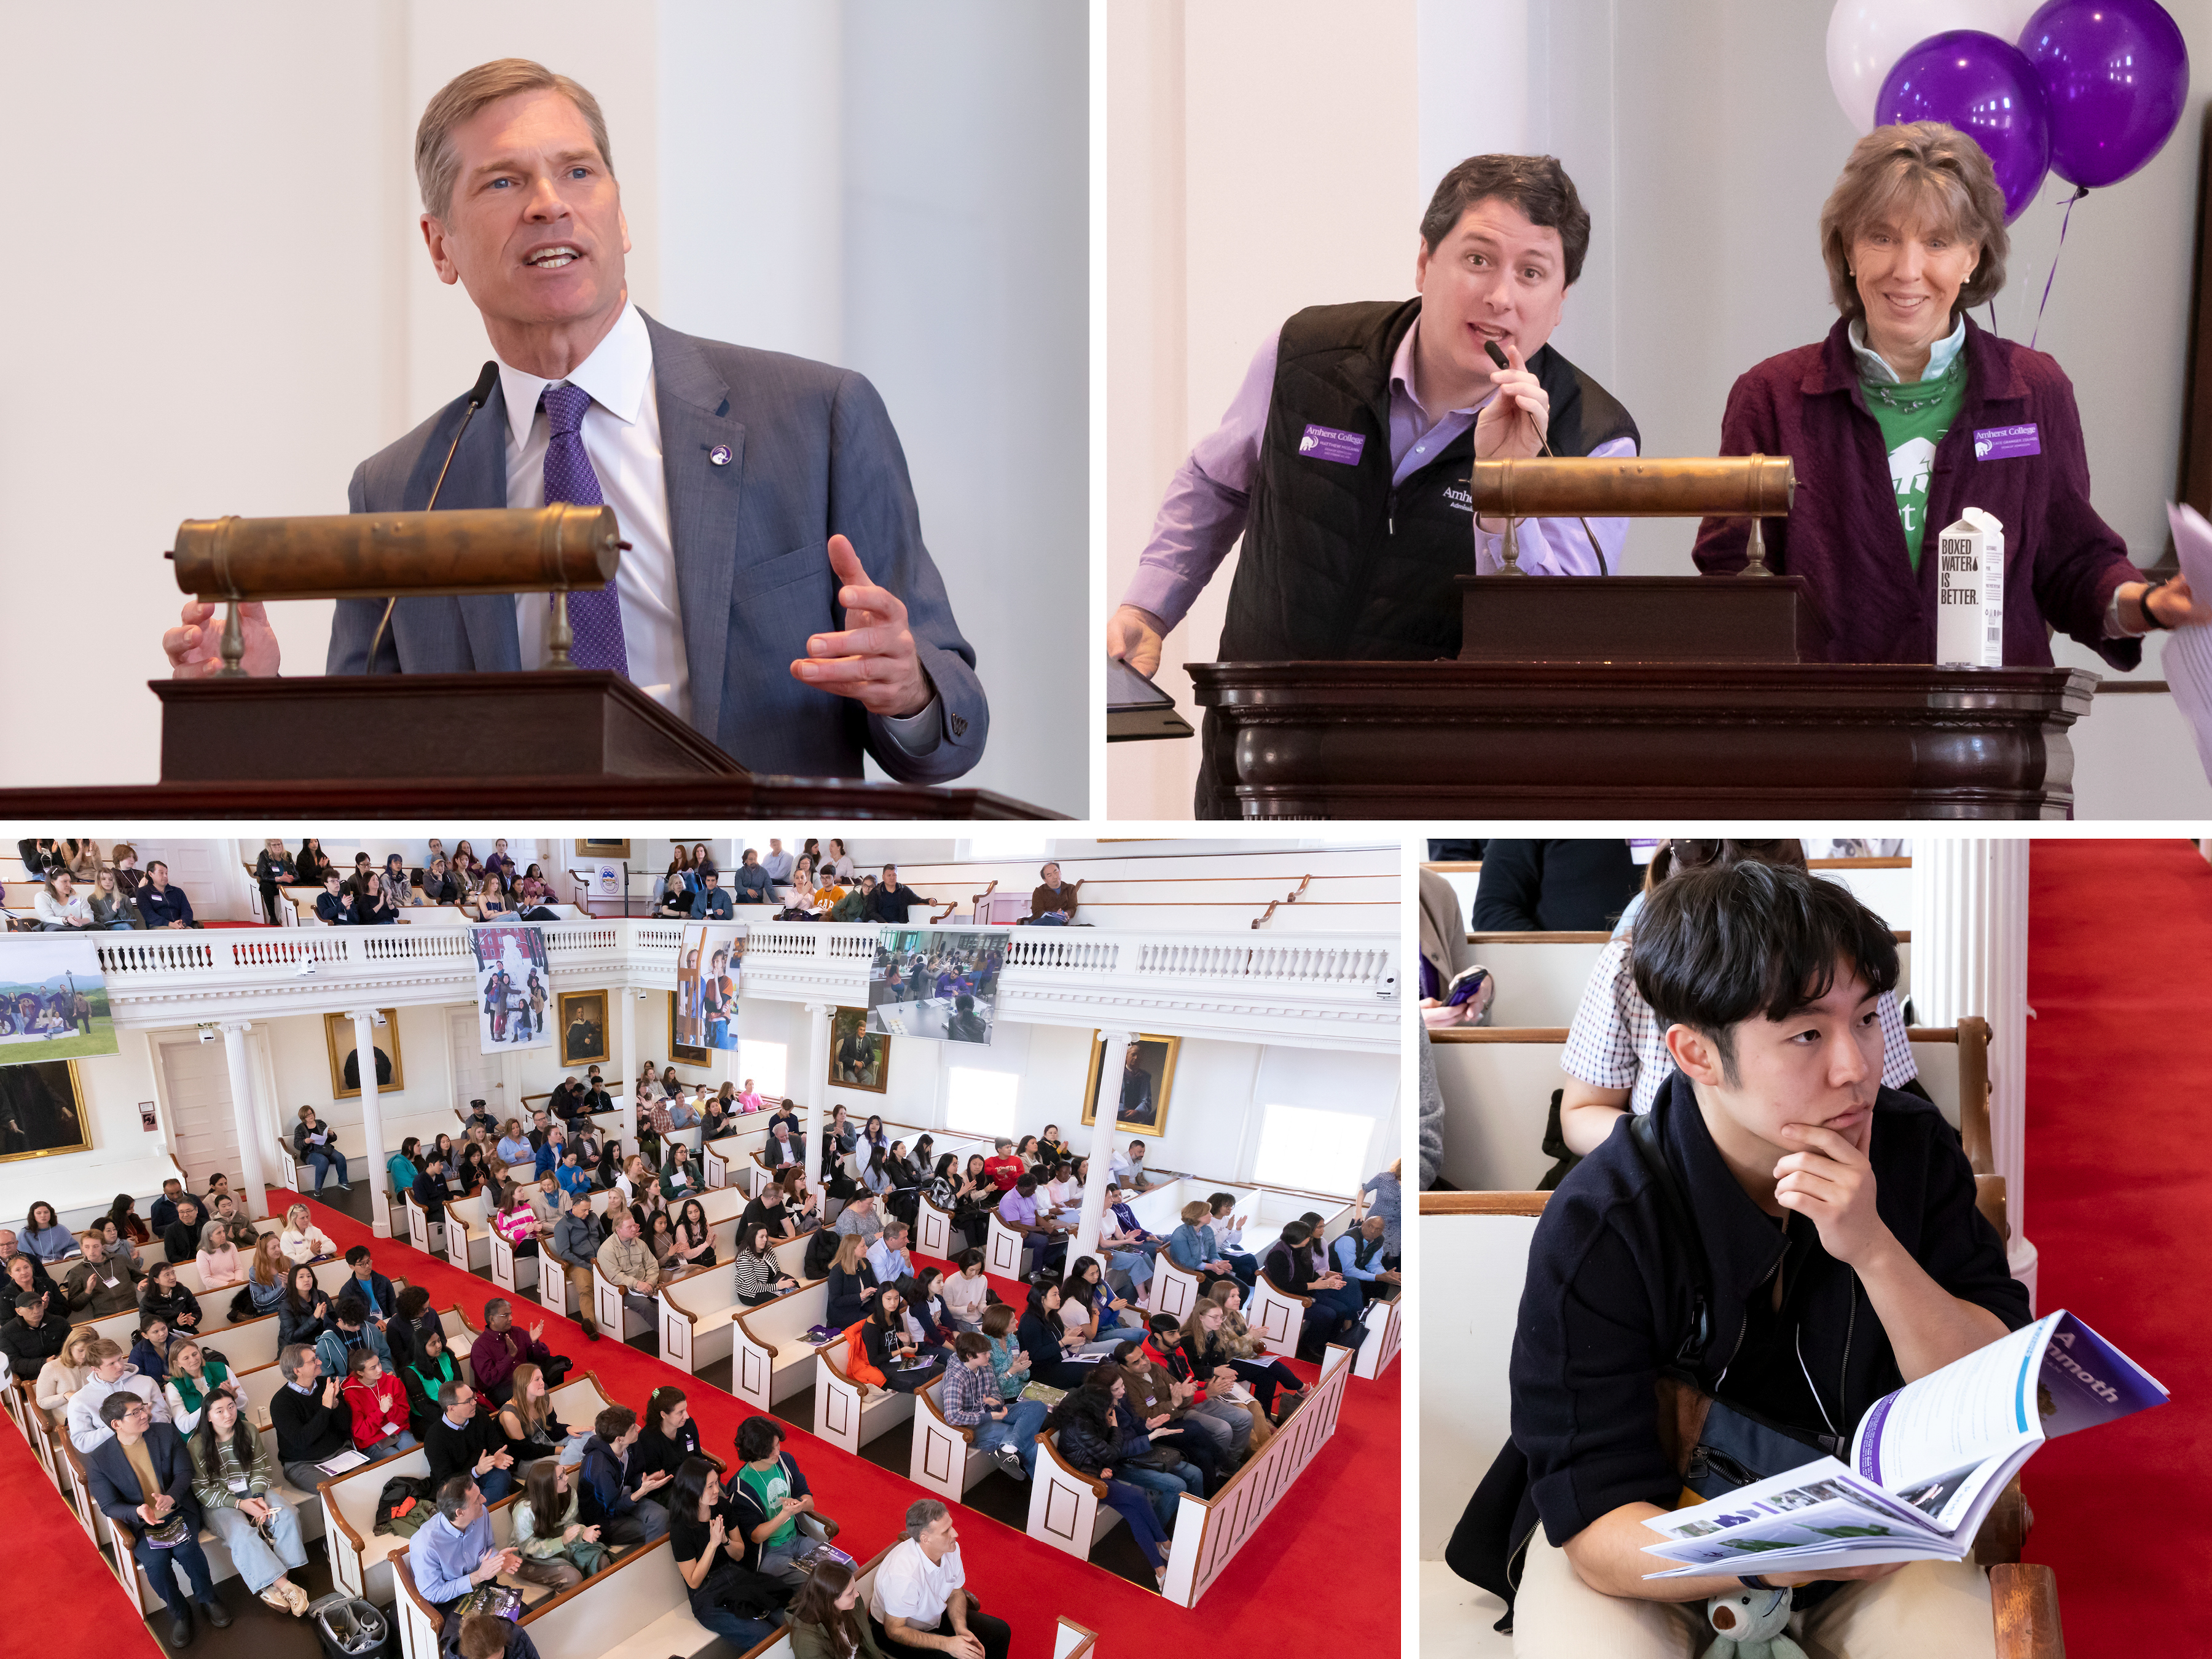 A college of 4 photos showing speakers and audience members inside Johnson Chapel during Be a Mammoth Day at Amherst College.